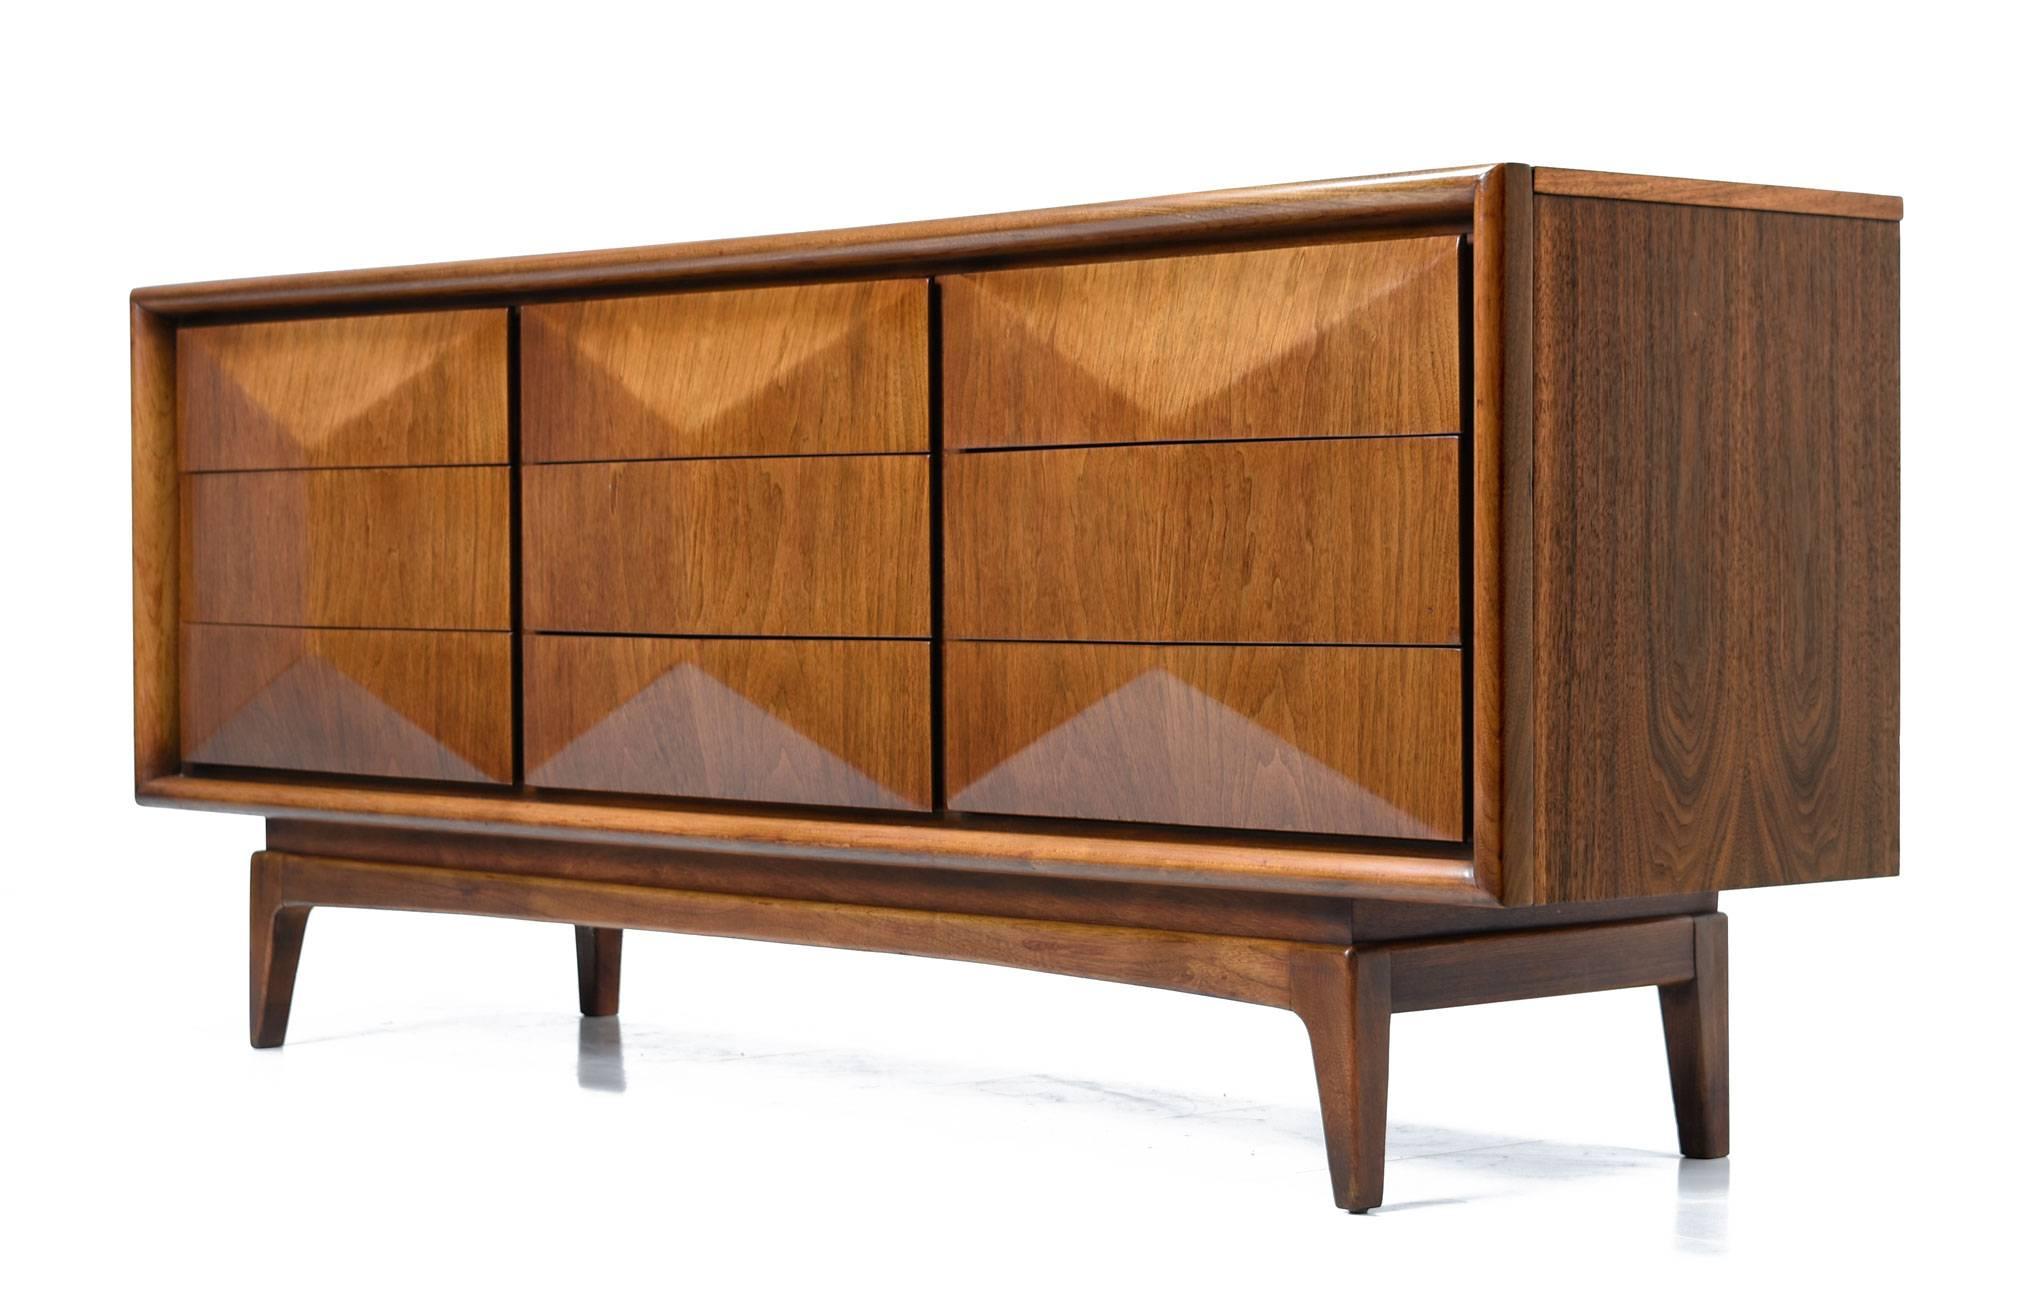 Mid-Century Modern United Furniture Company vintage circa 1950s nine-drawer triple dresser would work well in the bedroom as originally intended or in the living room re-purposed as an entertainment console. The long, Danish style profile